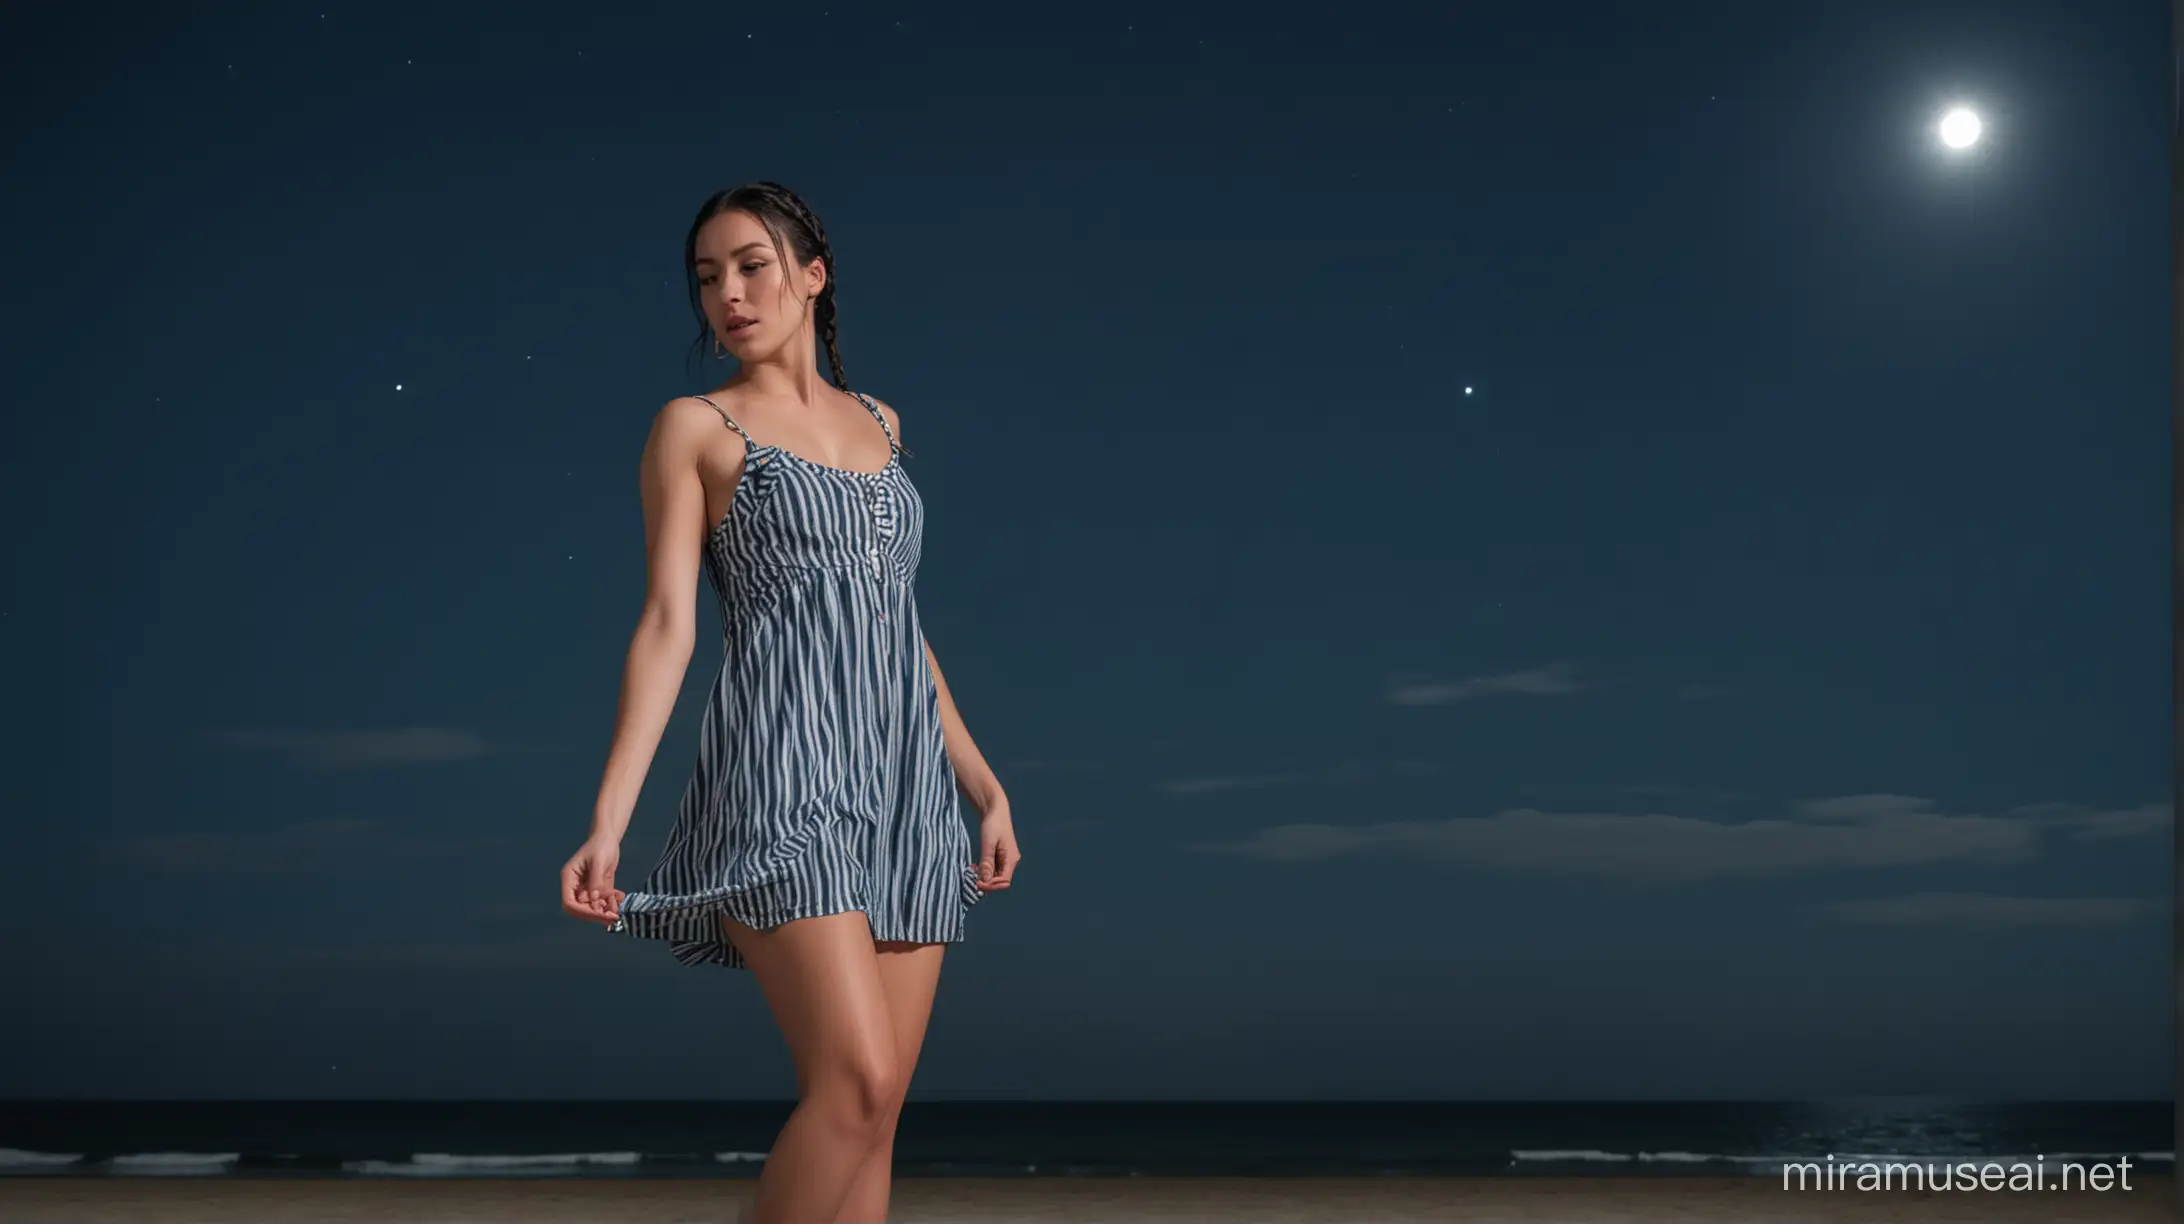 woman white skin, blue striped sundress, black hair, braided hairstyle, standing and looking straight at us, long legs, beautiful legs, big hips, night, black sky, beach, moonlight